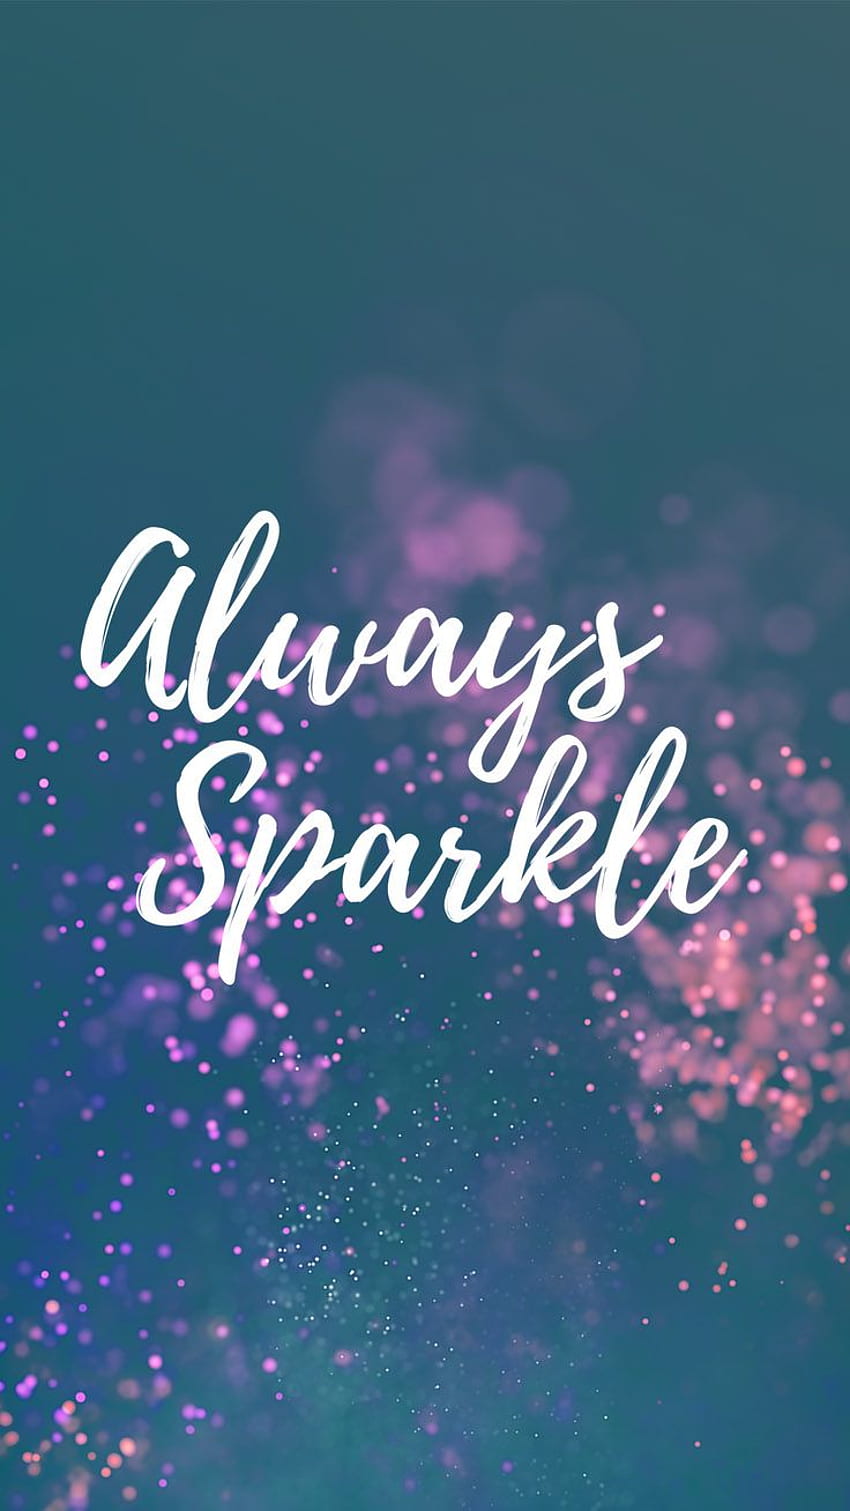 Inspirational Quotes iPhone Always Sparkle - iPhone, Cool Glitter HD phone wallpaper